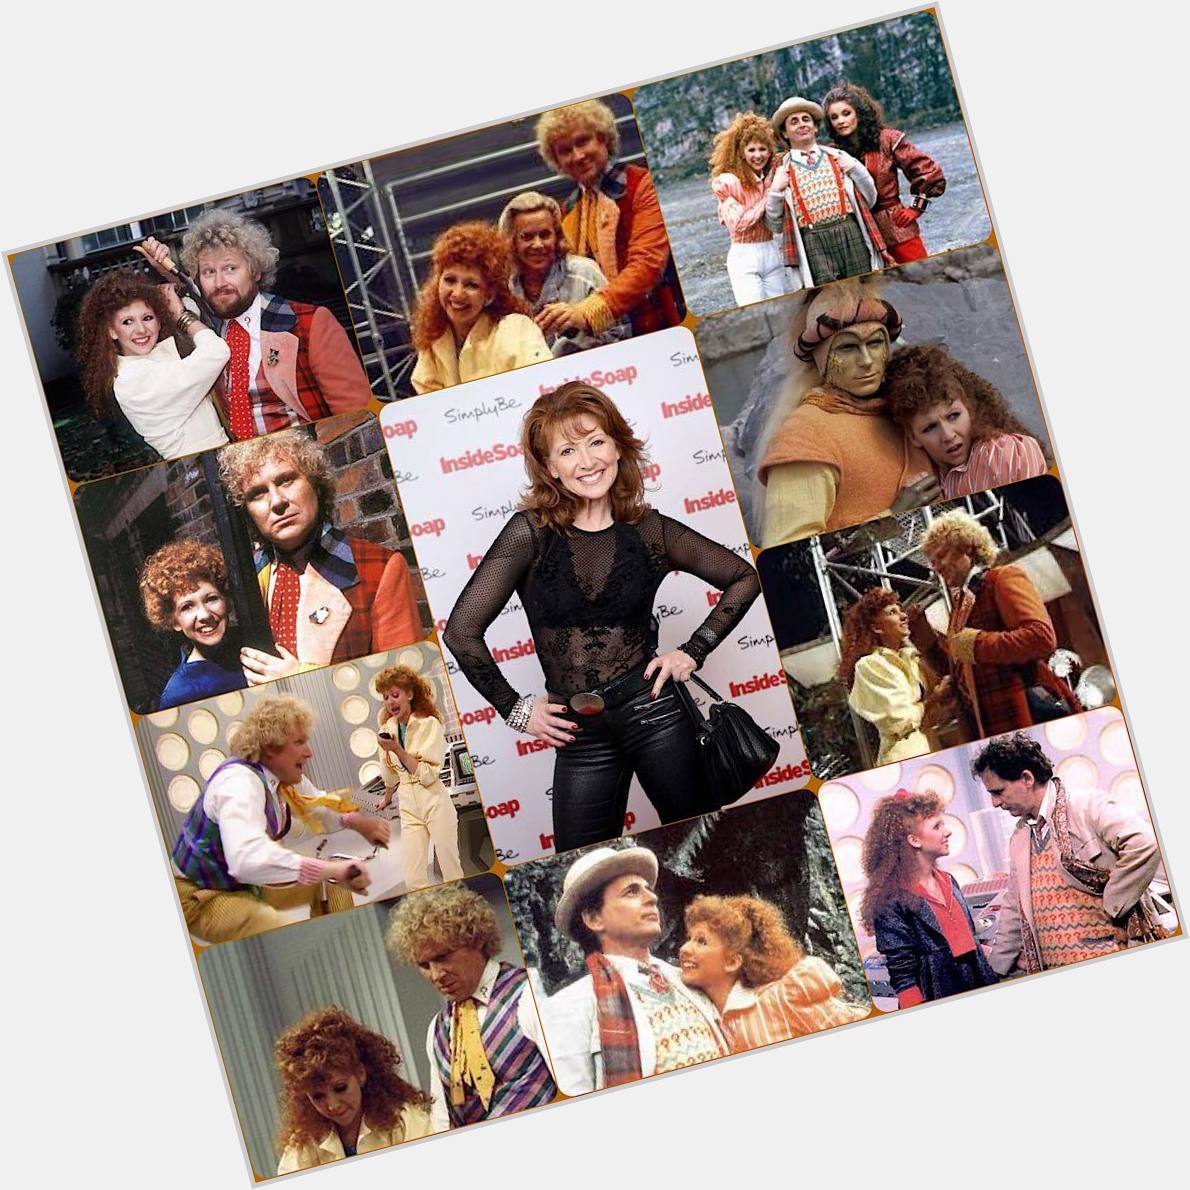 Happy Birthday Bonnie Langford, who played Melanie in & much more! 